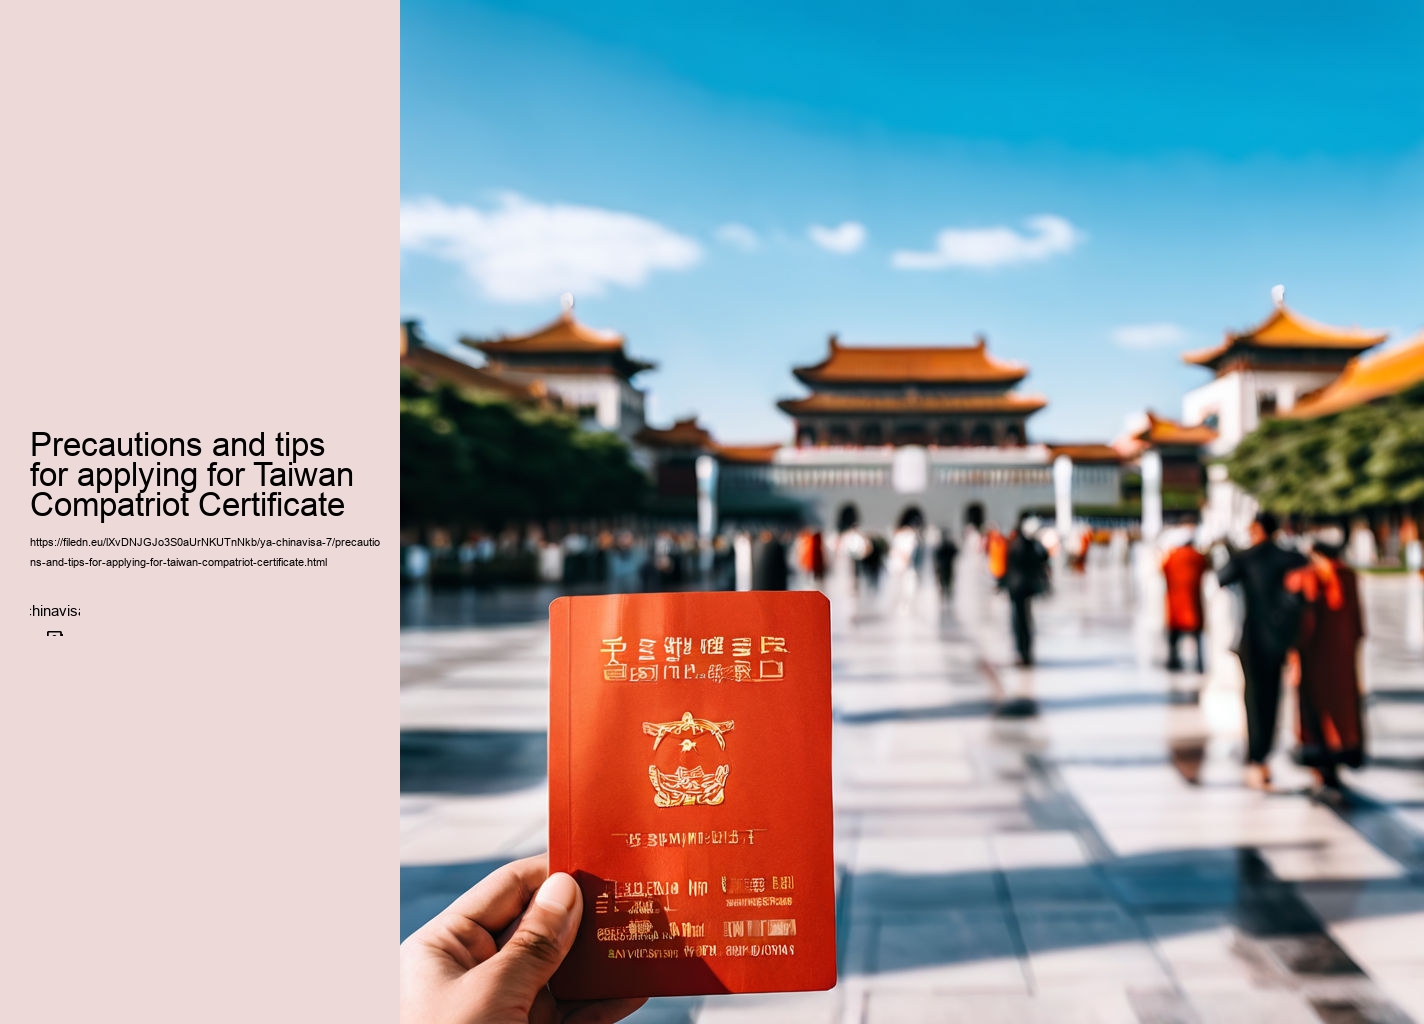 Precautions and tips for applying for Taiwan Compatriot Certificate